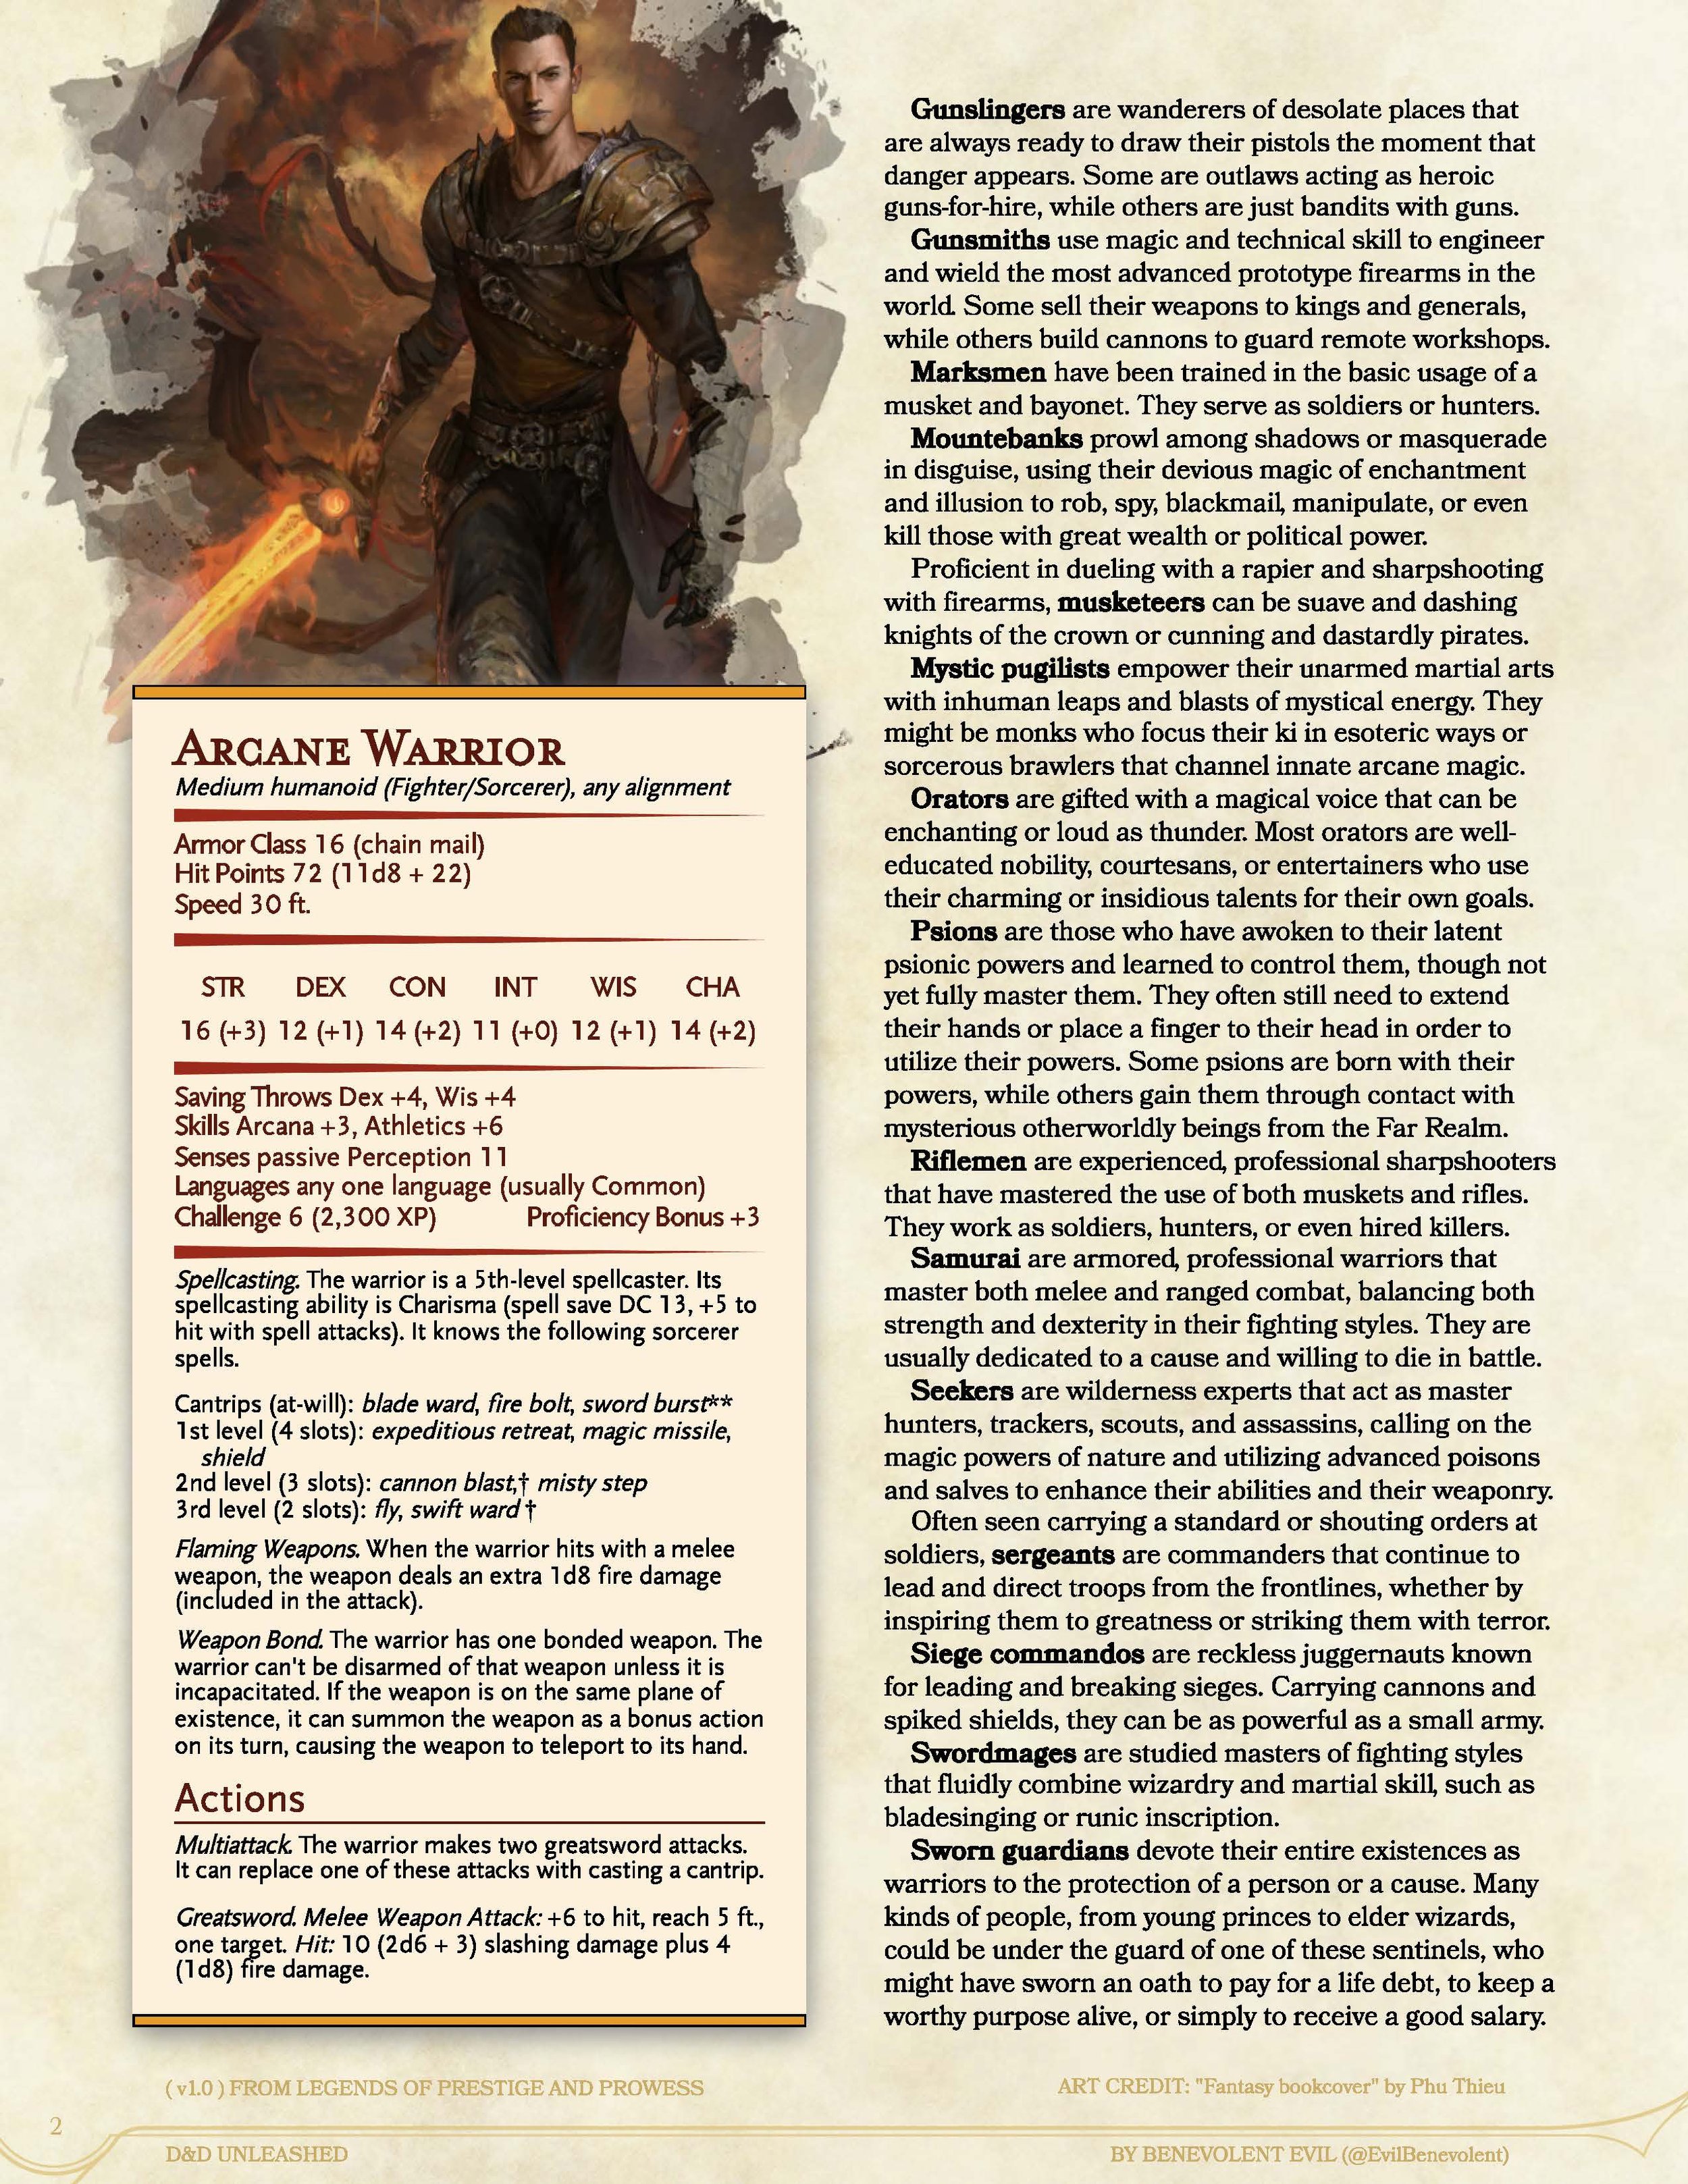 D&D Unleashed - Assorted Humanoid NPCs (v1_0)_Page_02.jpg